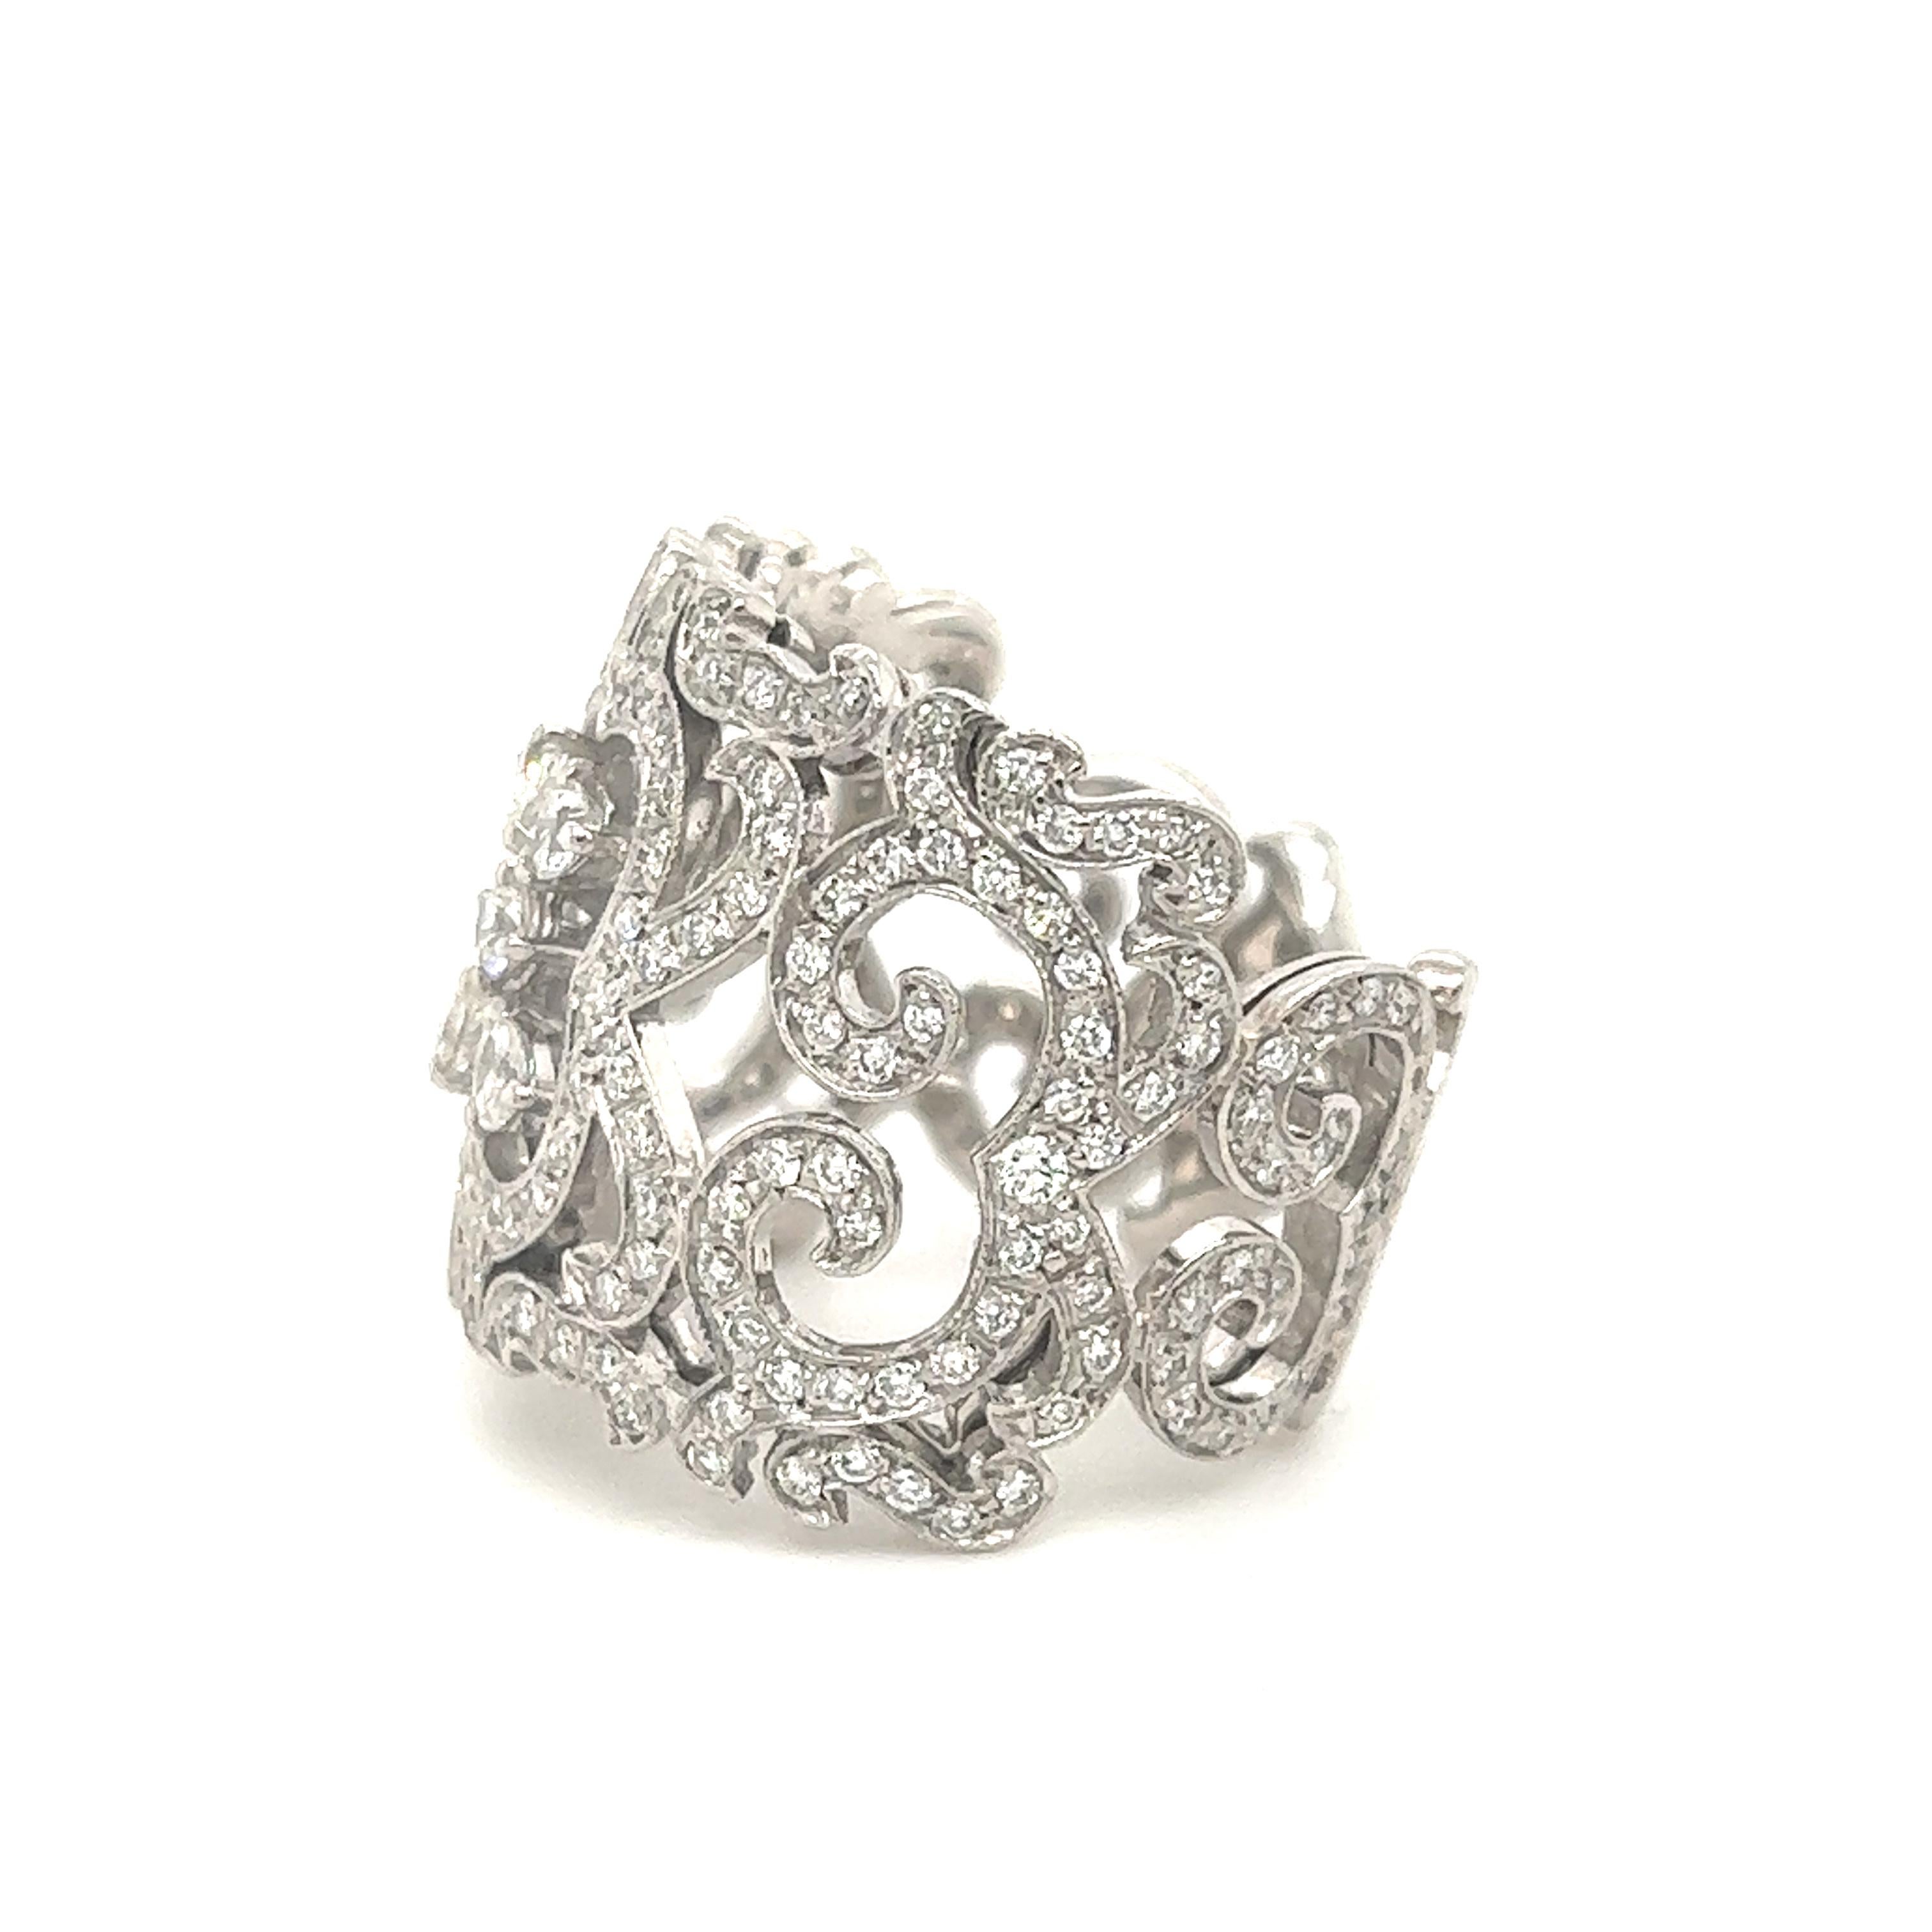 Fantastic ring crafted in 18k white gold. The ring is crafted by designer Orianne Collins. Beautifully detailed with swirling patterns in the metal workings this ring is sure to grab attention when worn. The rings set with over 2.75 tcw. of round